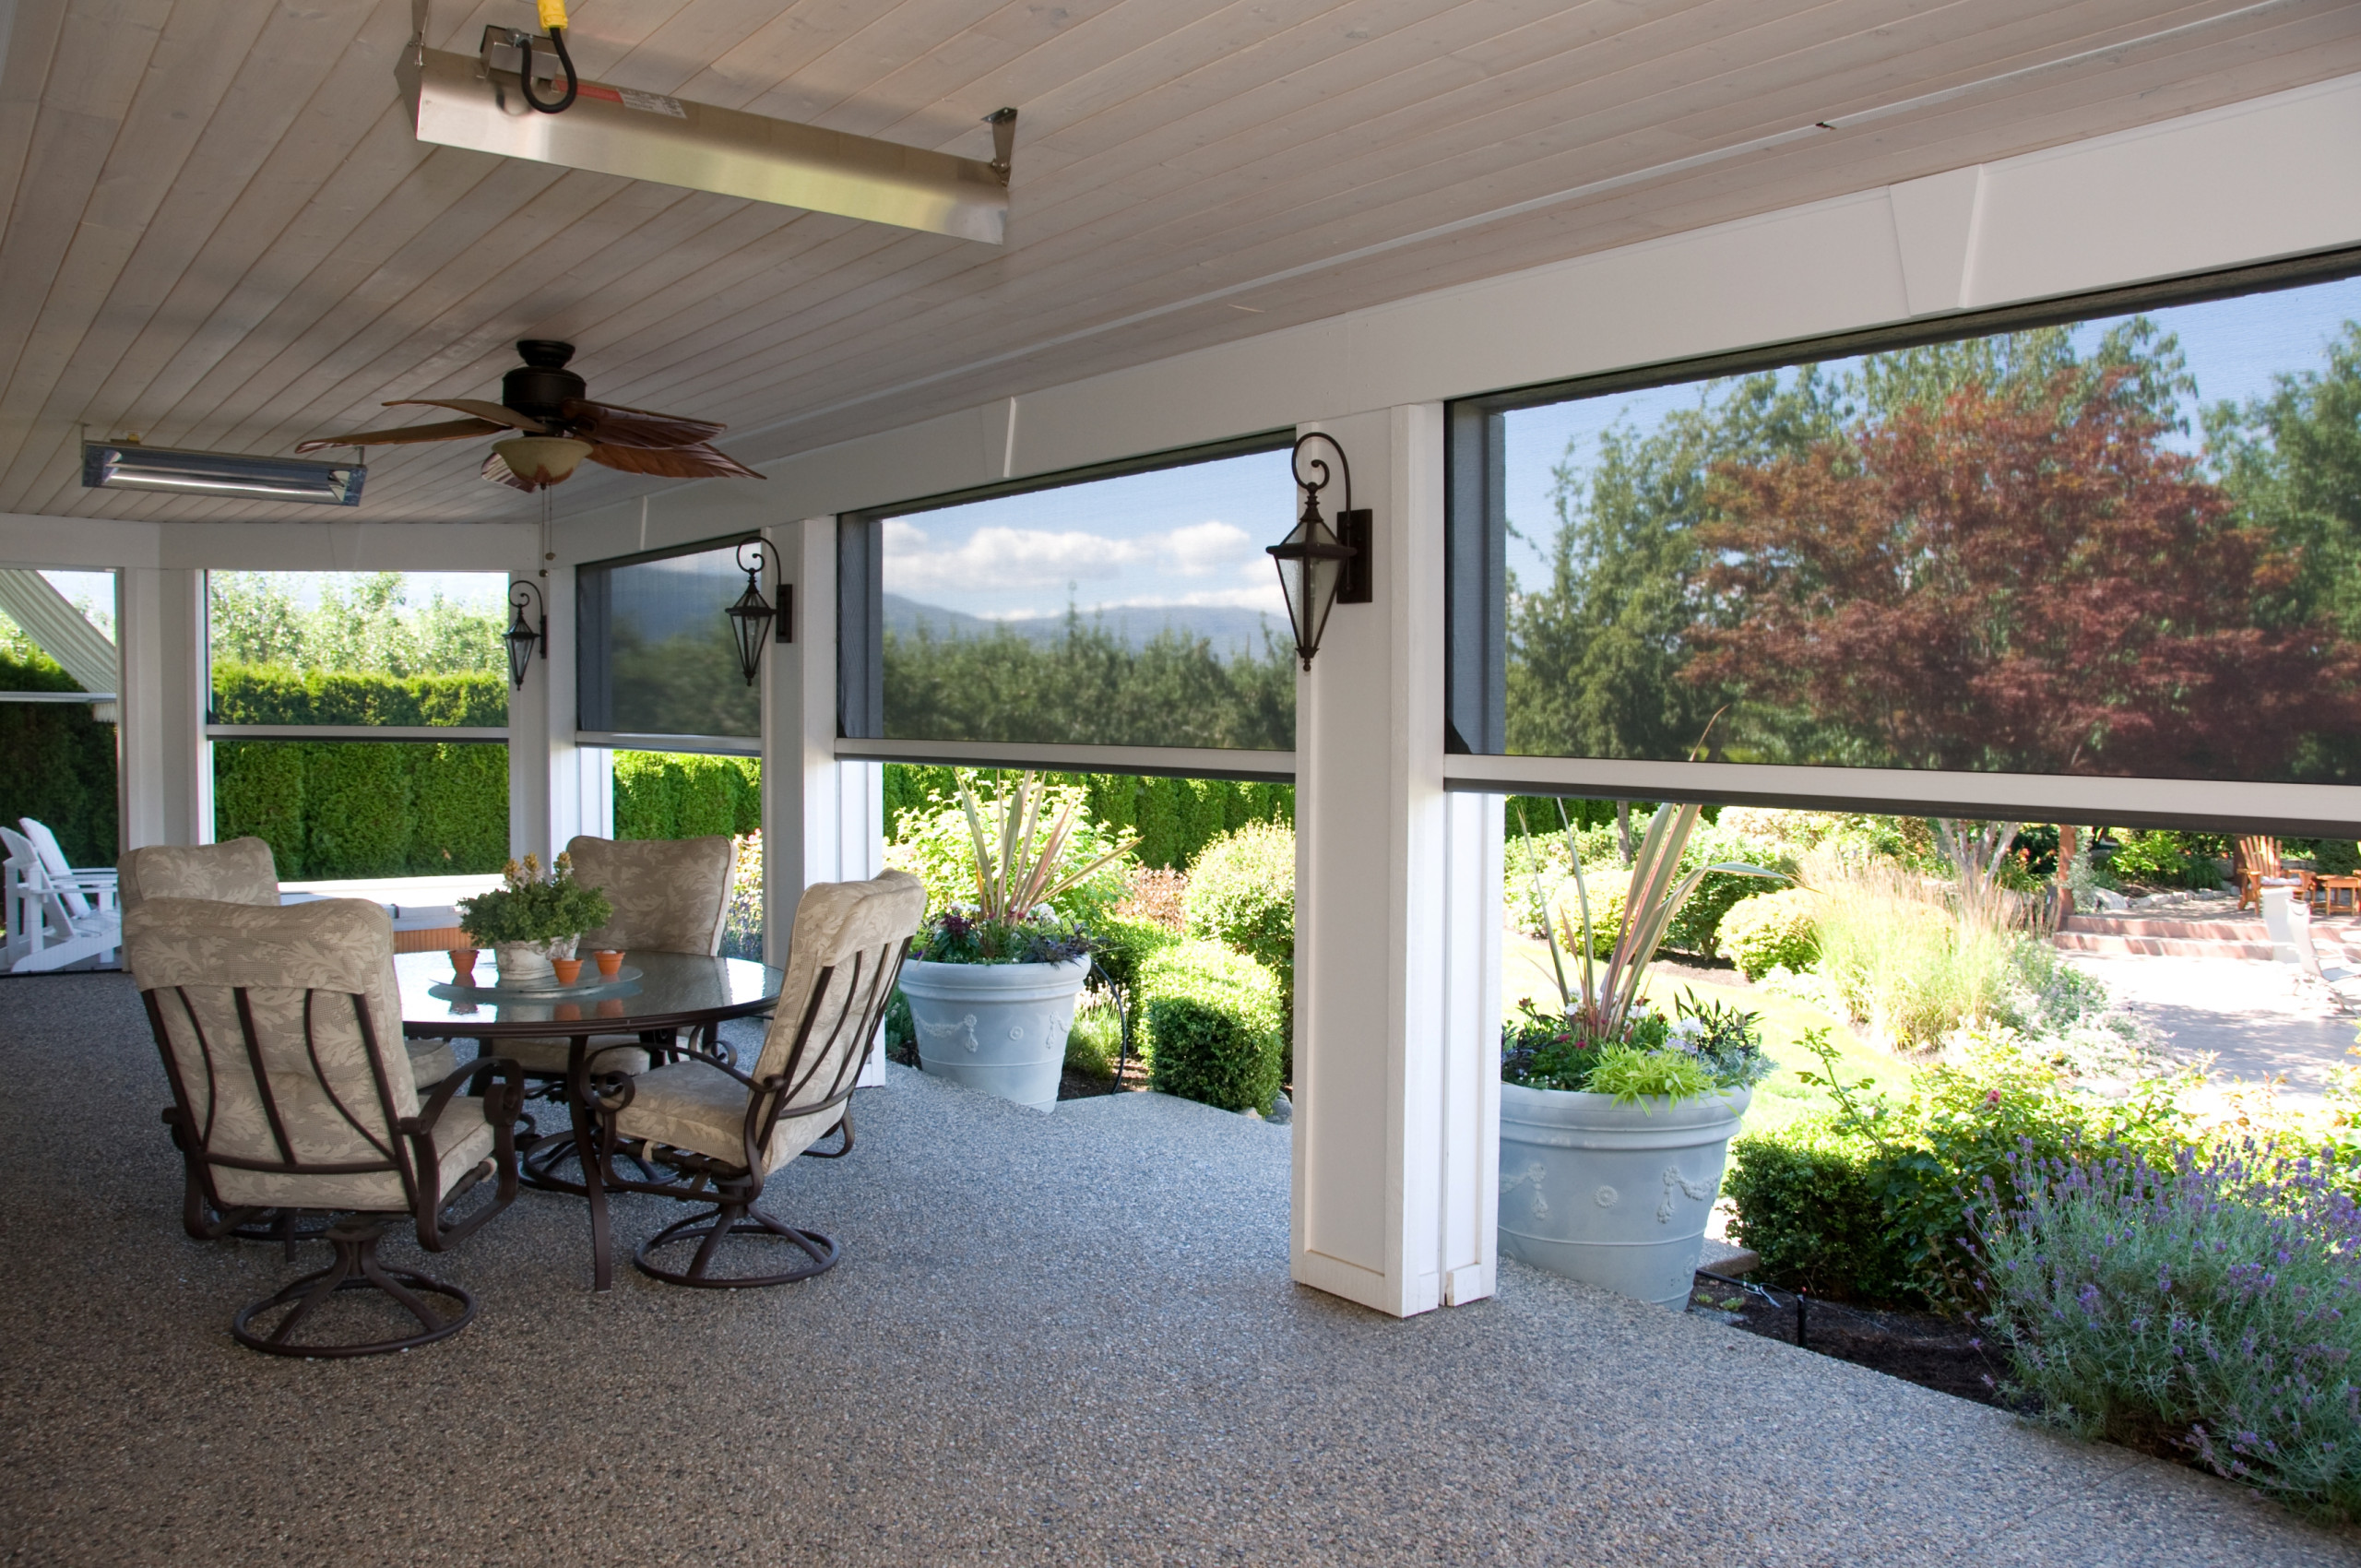 Motorized Retractable Screens For, How Much Do Motorized Patio Screens Cost